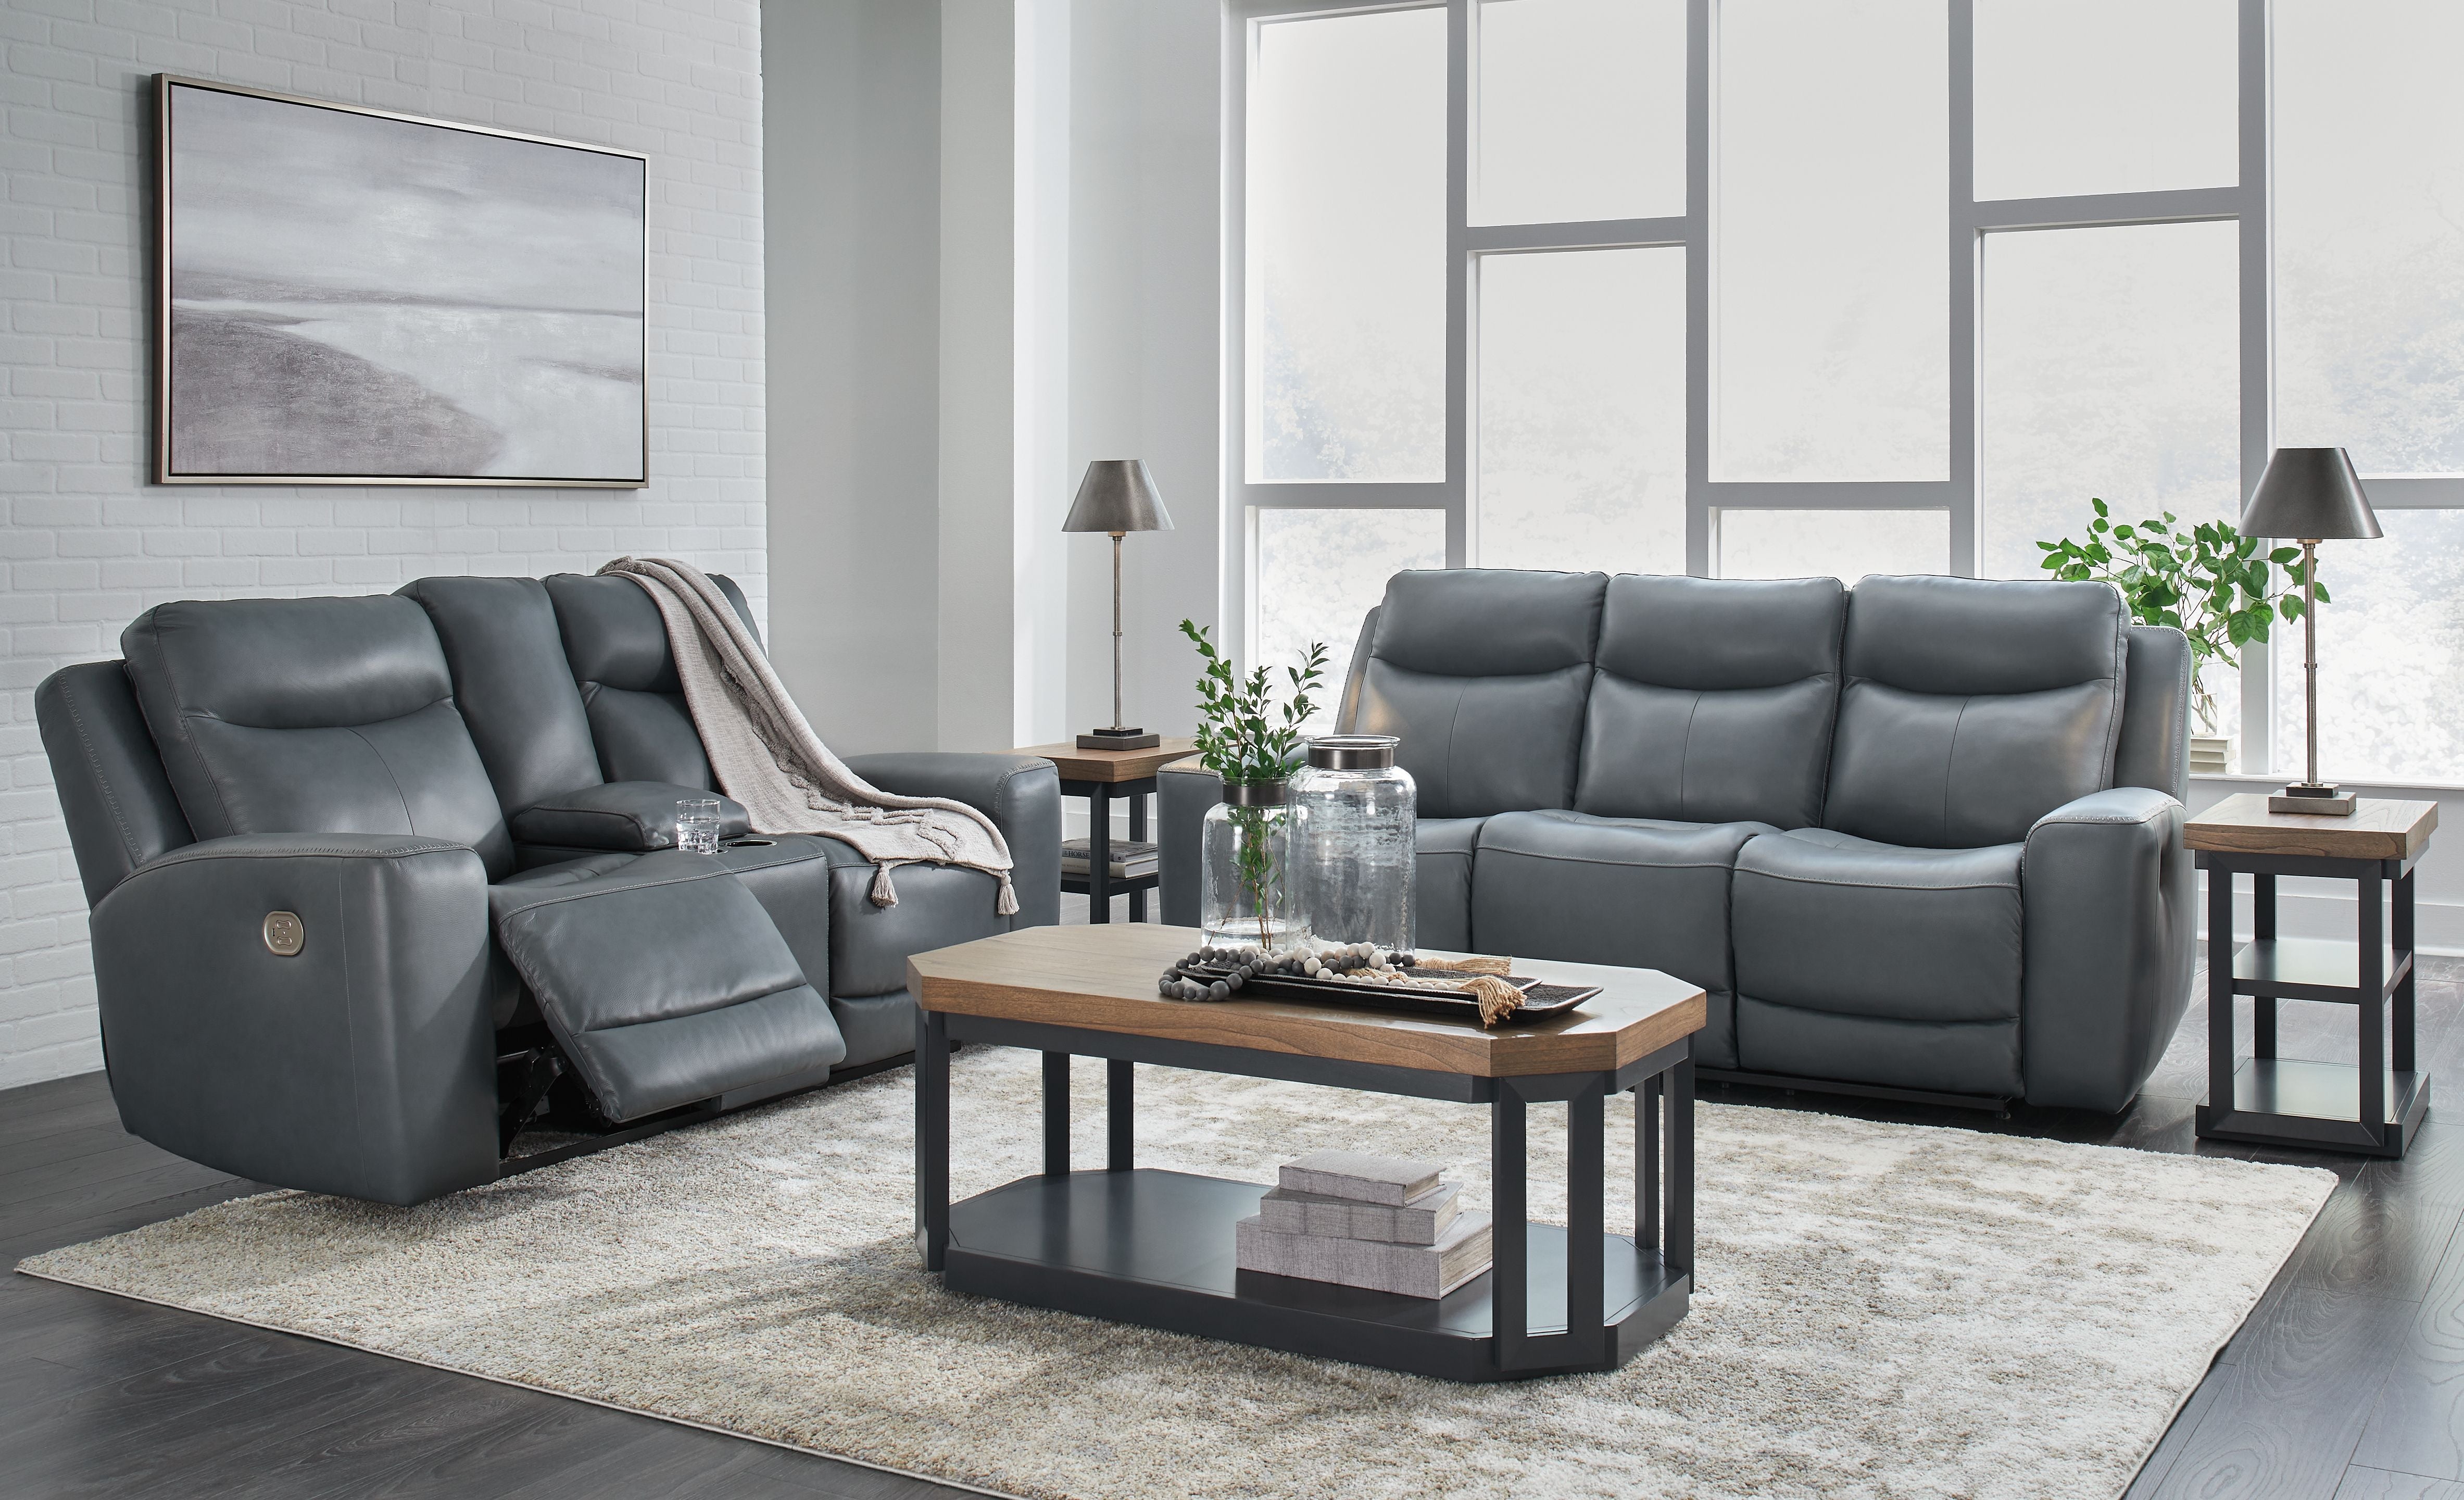 Mindanao Steel 2-Piece Gray Leather Power Reclining Living Room Set: Sofa, Loveseat with Console